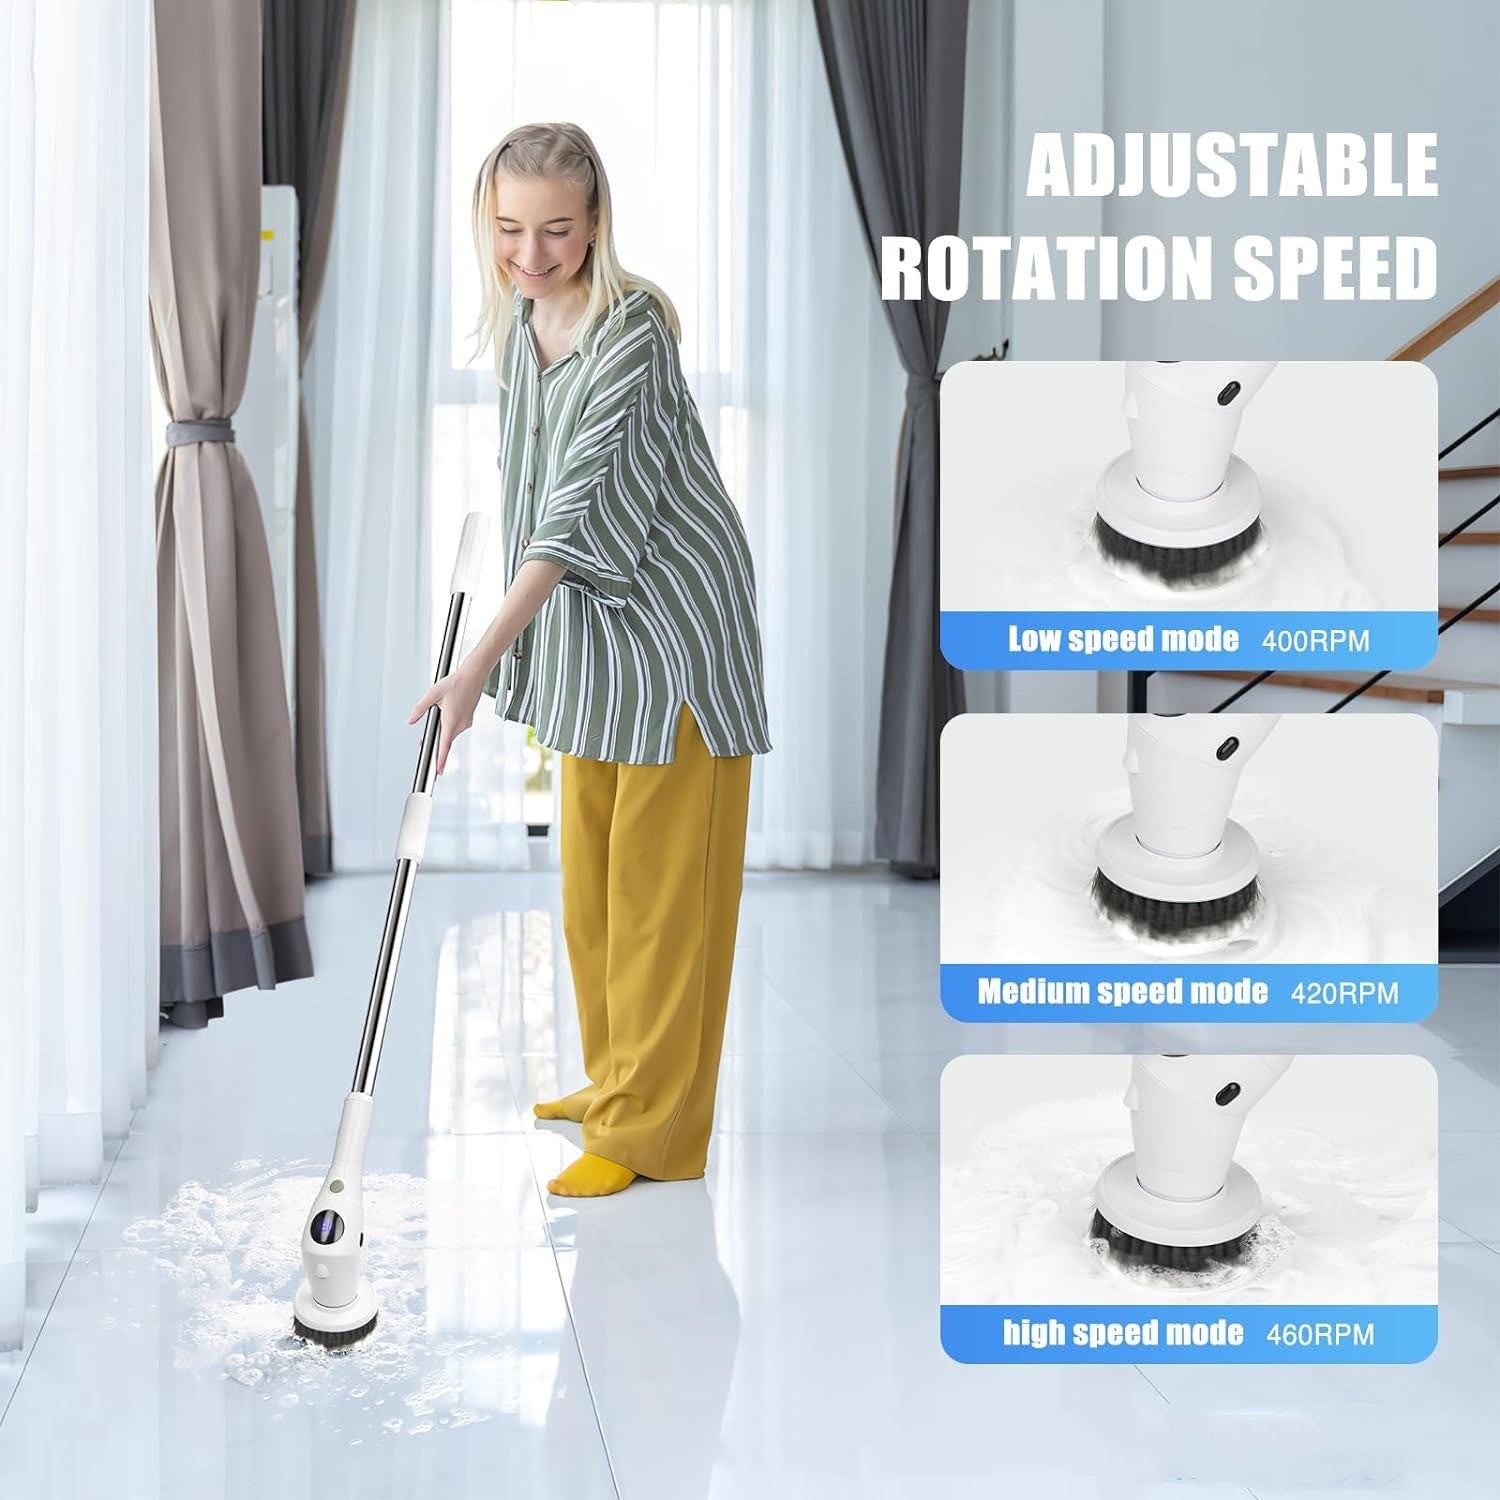 8-in-1 electric cleaning brush